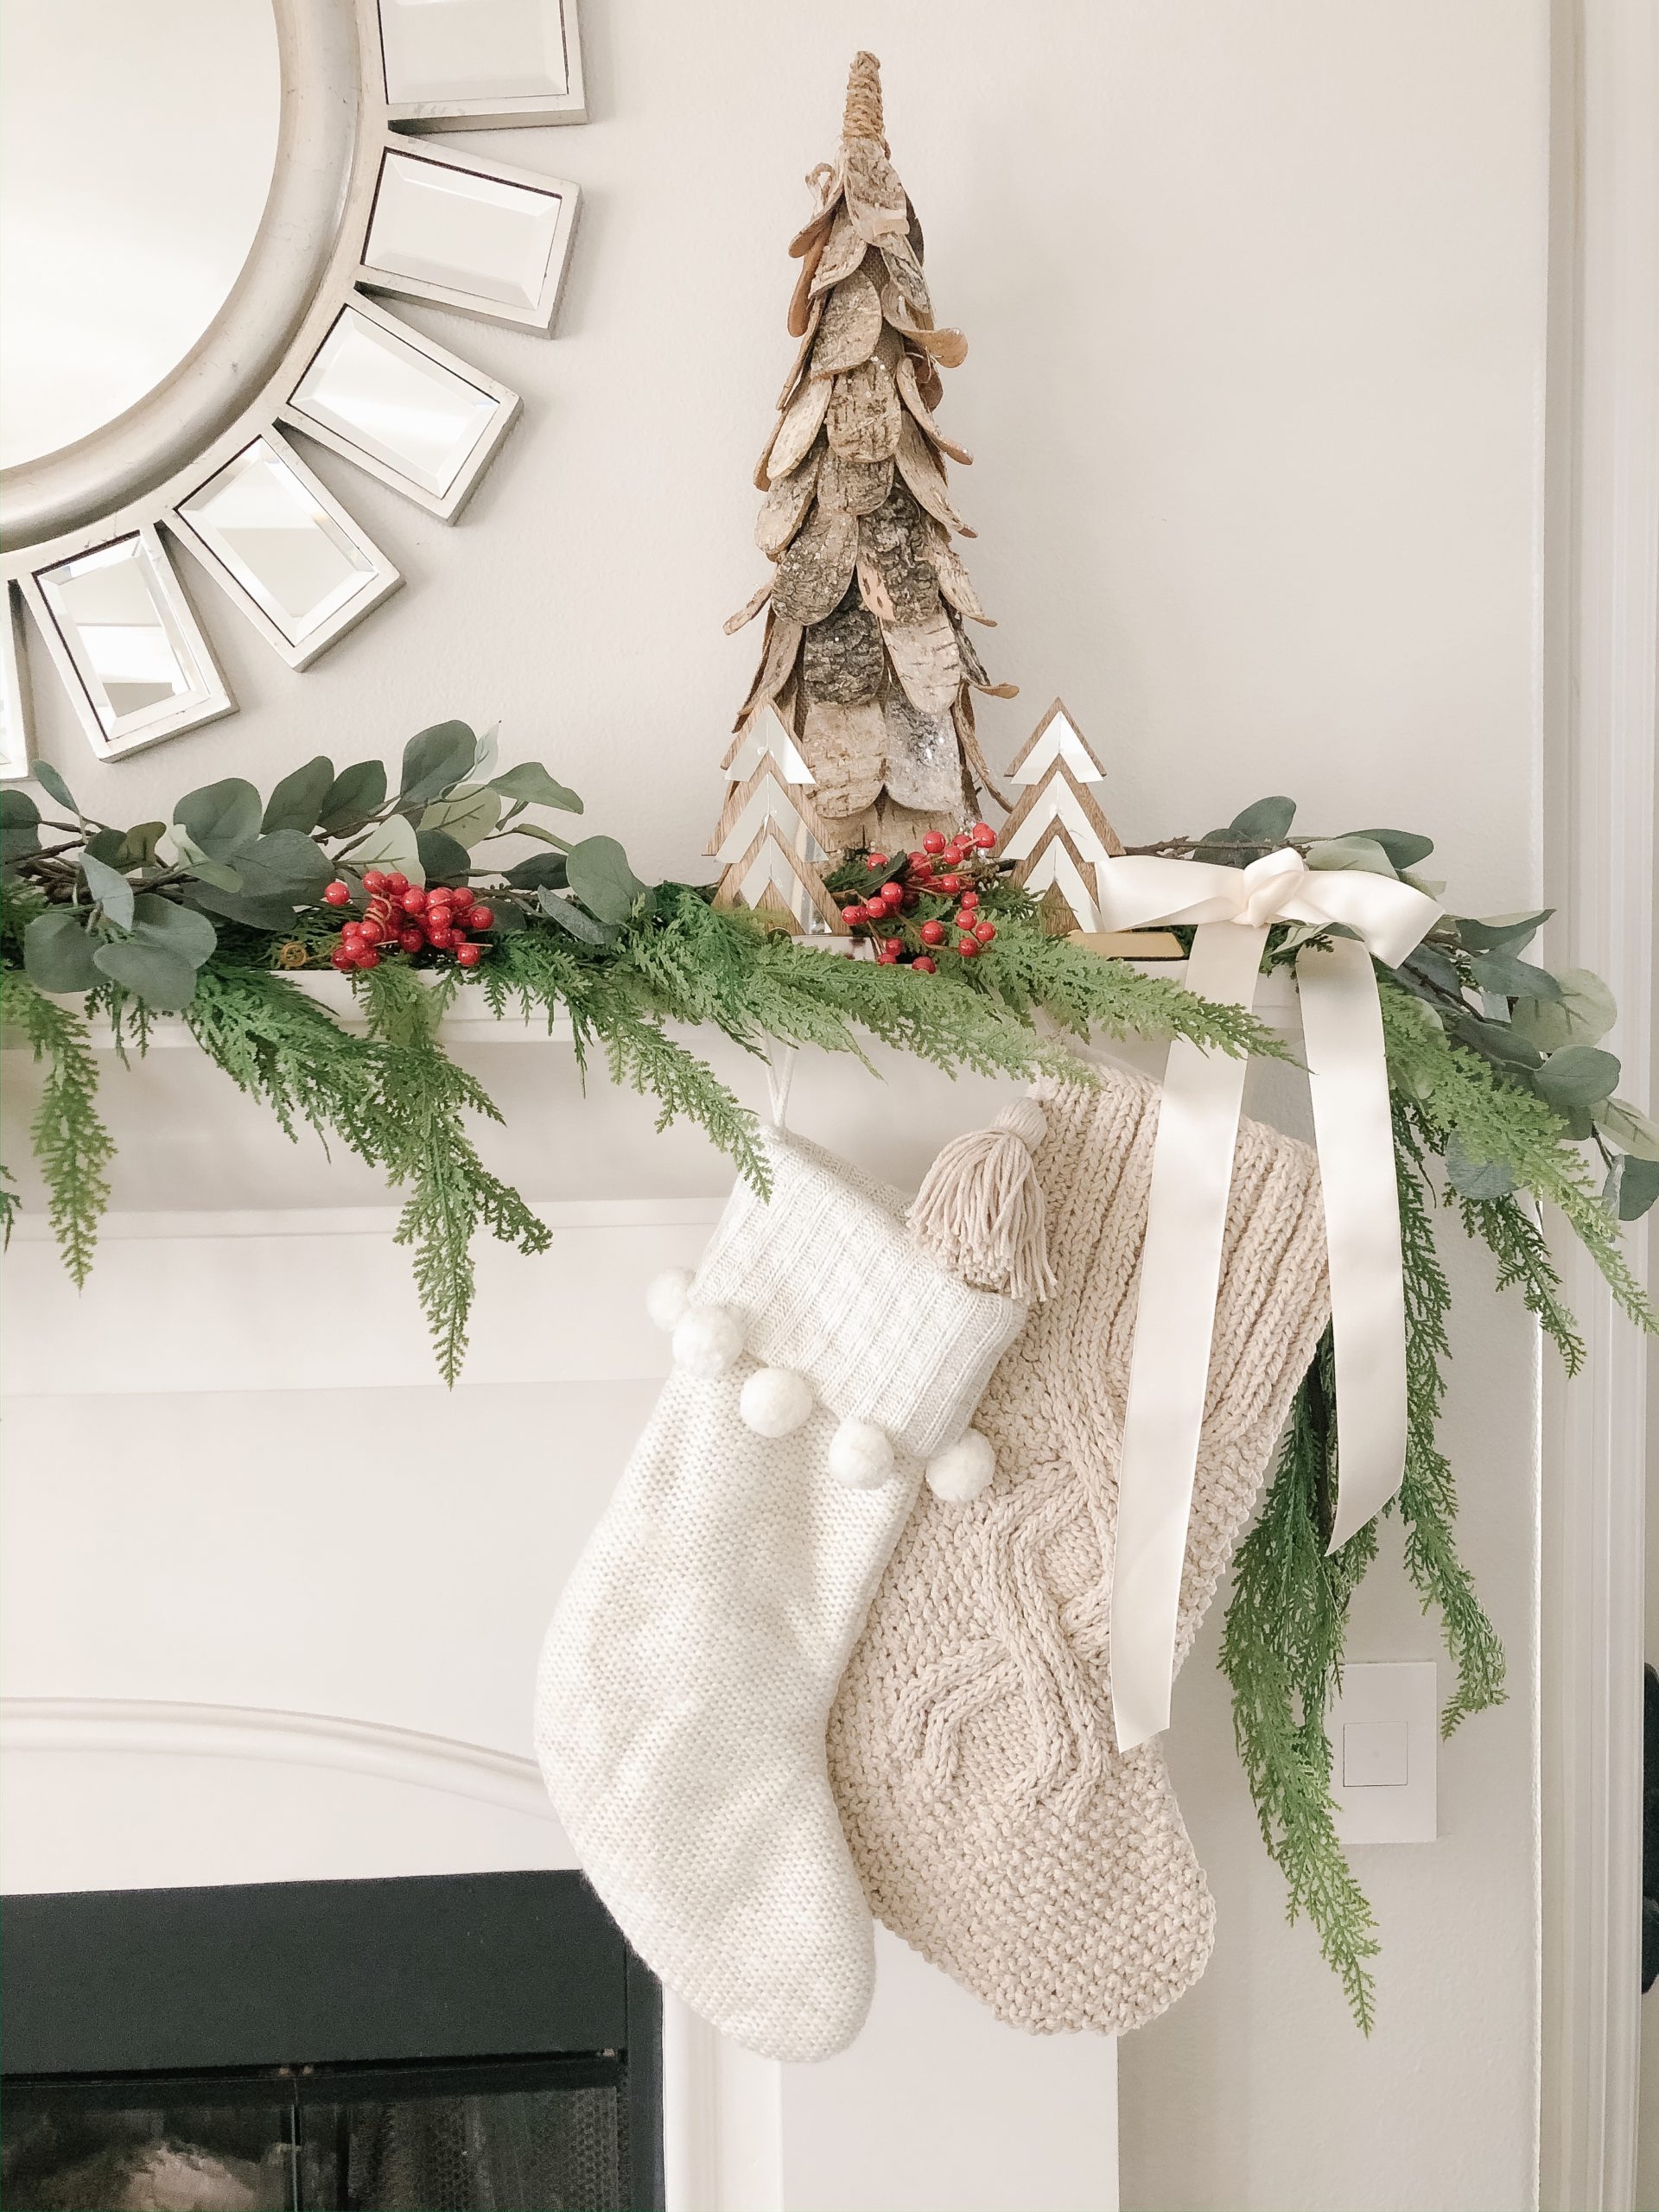 I found the best faux garland that looks very realistic